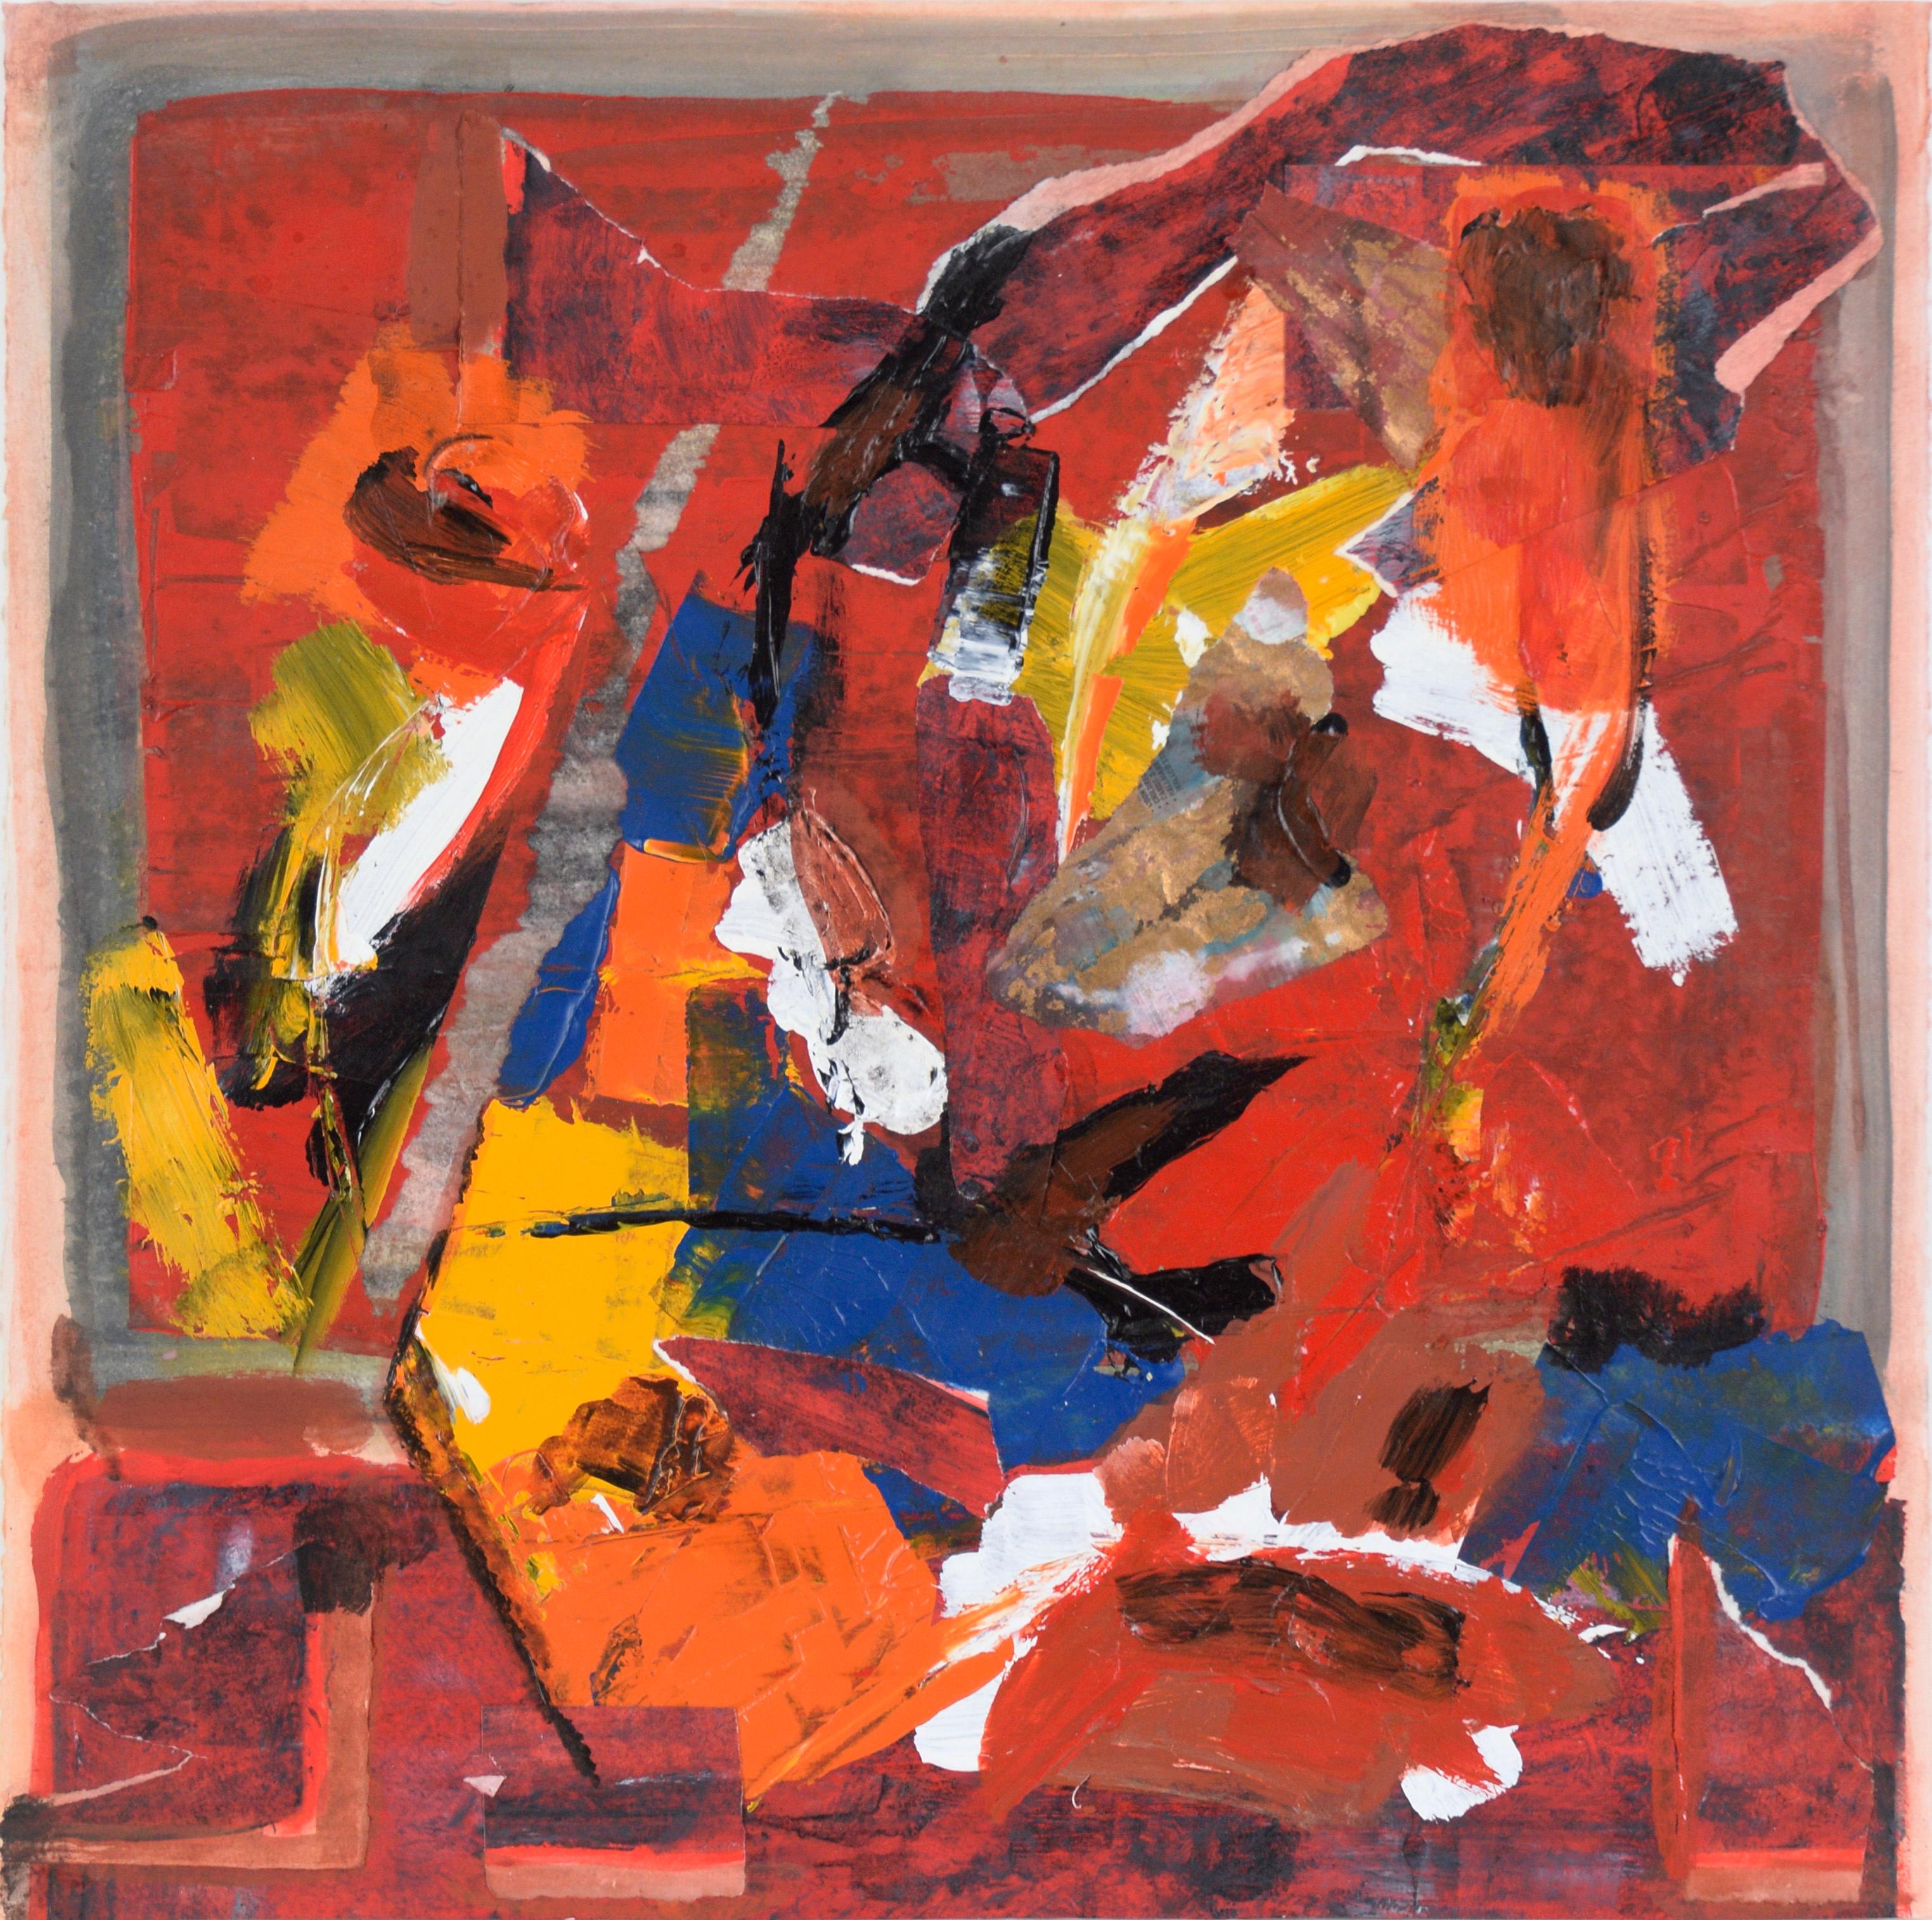 Ricardo de Silva Animal Painting - Abstract Expressionist Collage in Acrylic on Paper